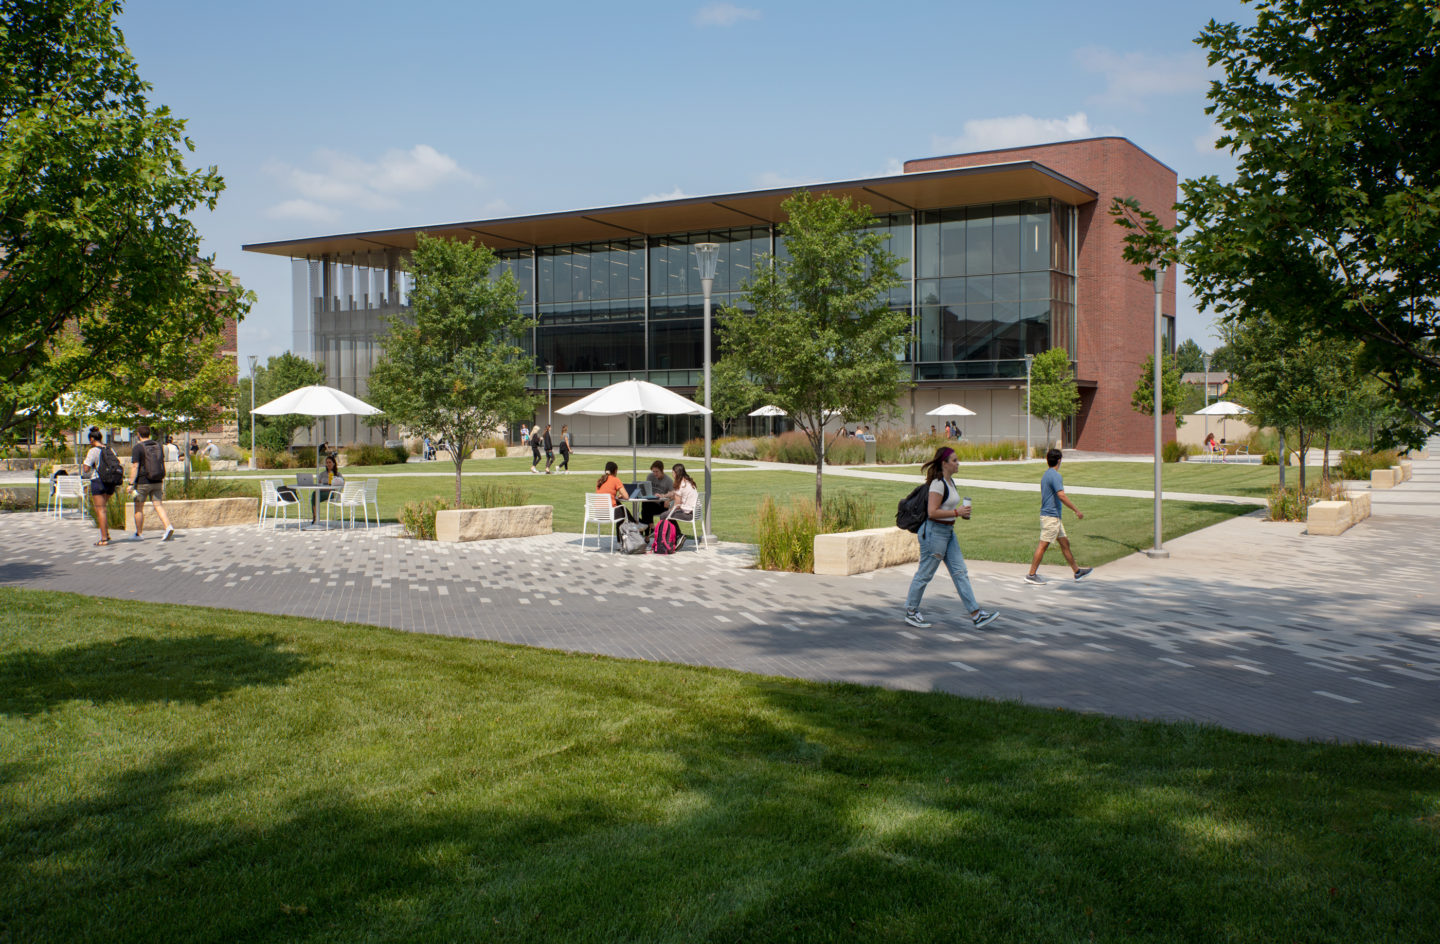 Exterior of the building shows the campus community. Students walking on the sidewalk out front.